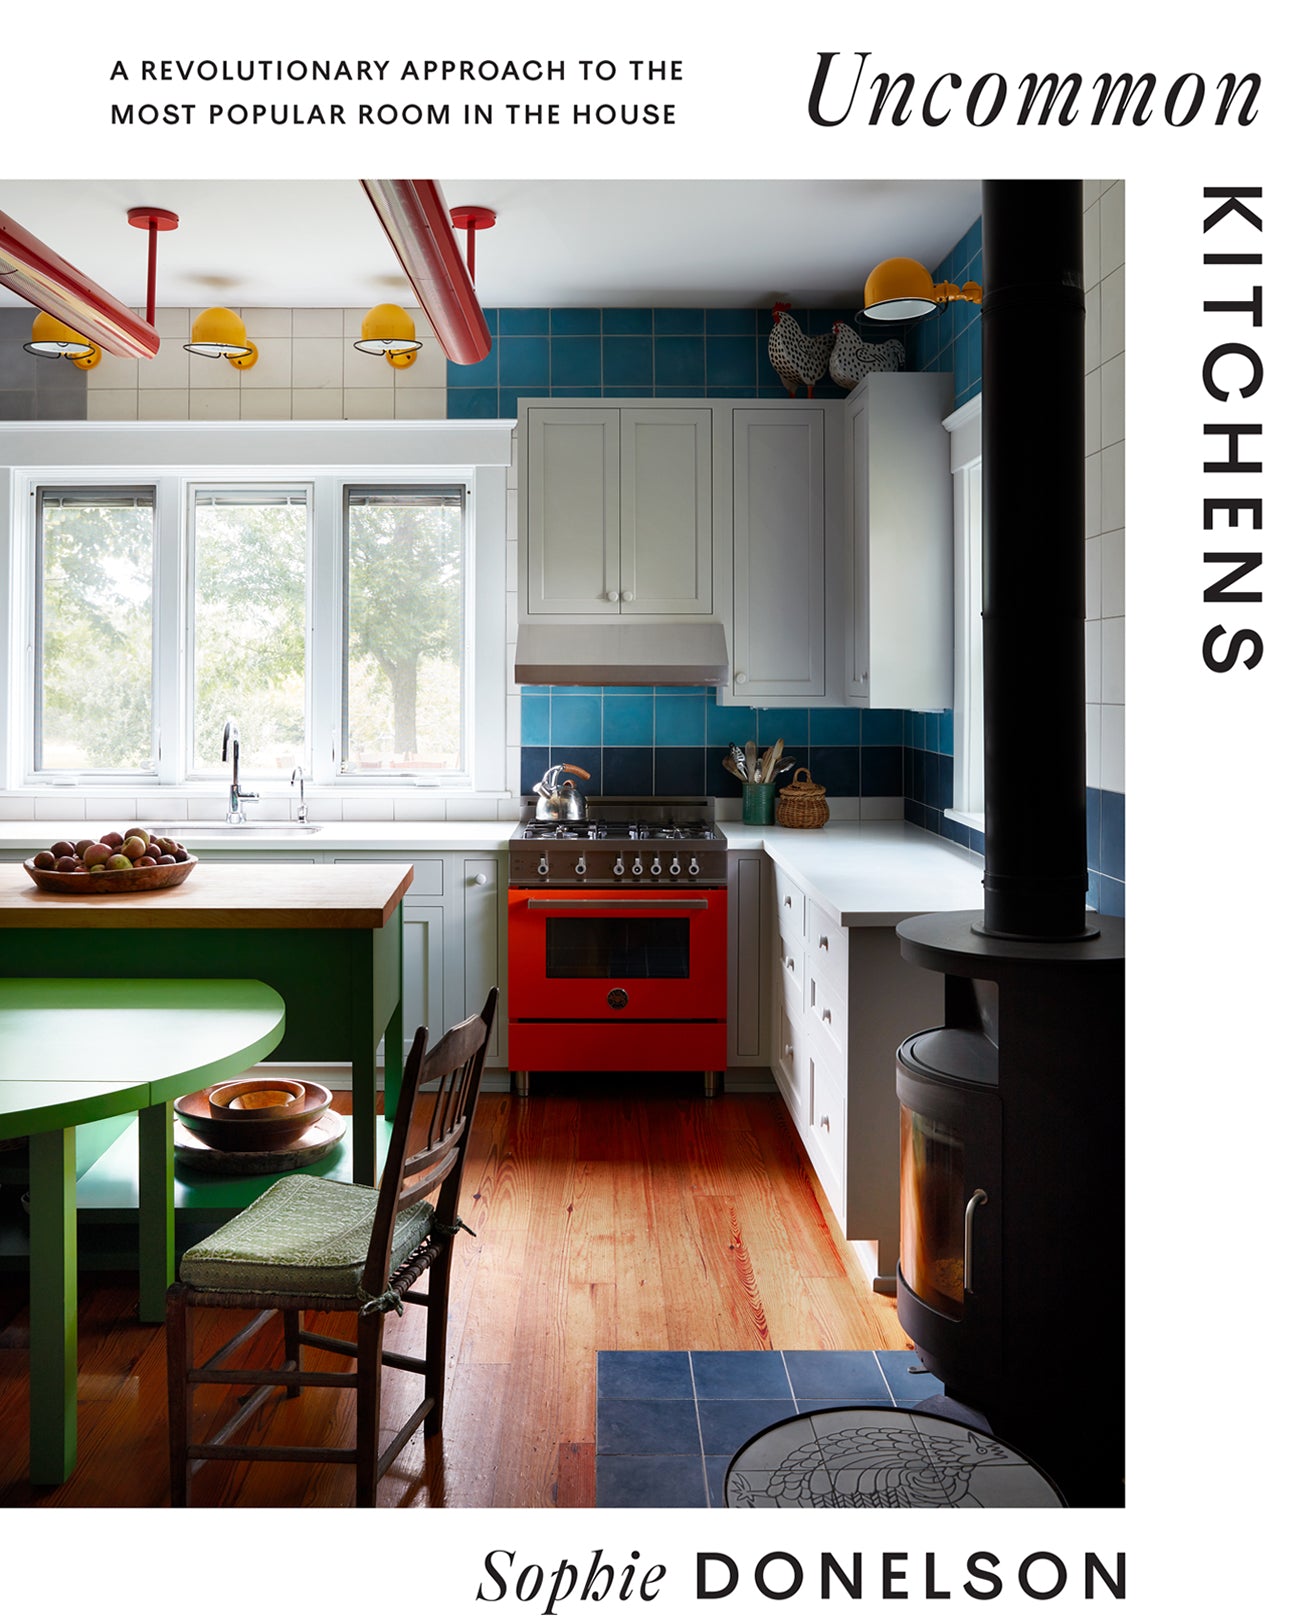 Uncommon Kitchens by Sophie Donelson